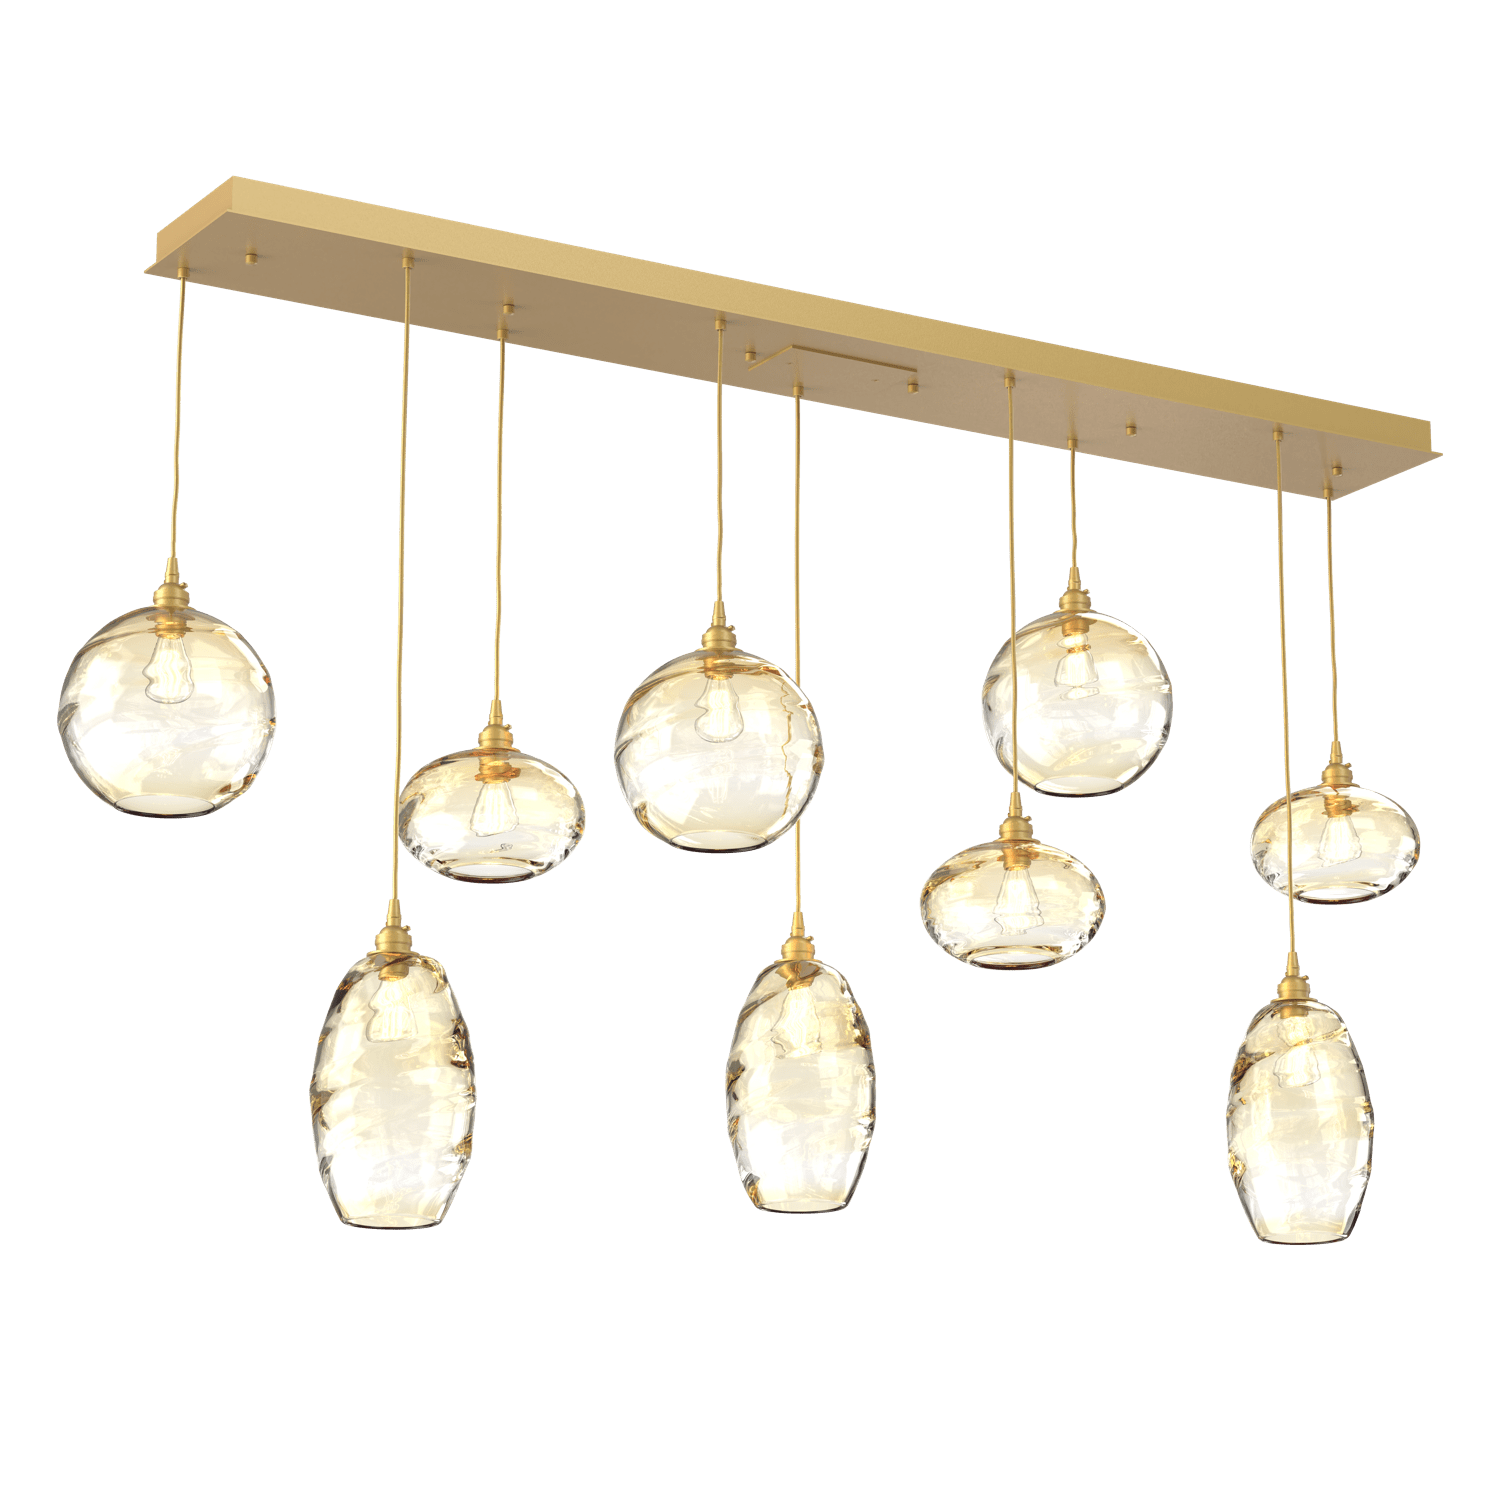 PLB0048-09-GB-OA-Hammerton-Studio-Optic-Blown-Glass-Misto-9-light-linear-pendant-chandelier-with-gilded-brass-finish-and-optic-amber-blown-glass-shades-and-incandescent-lamping